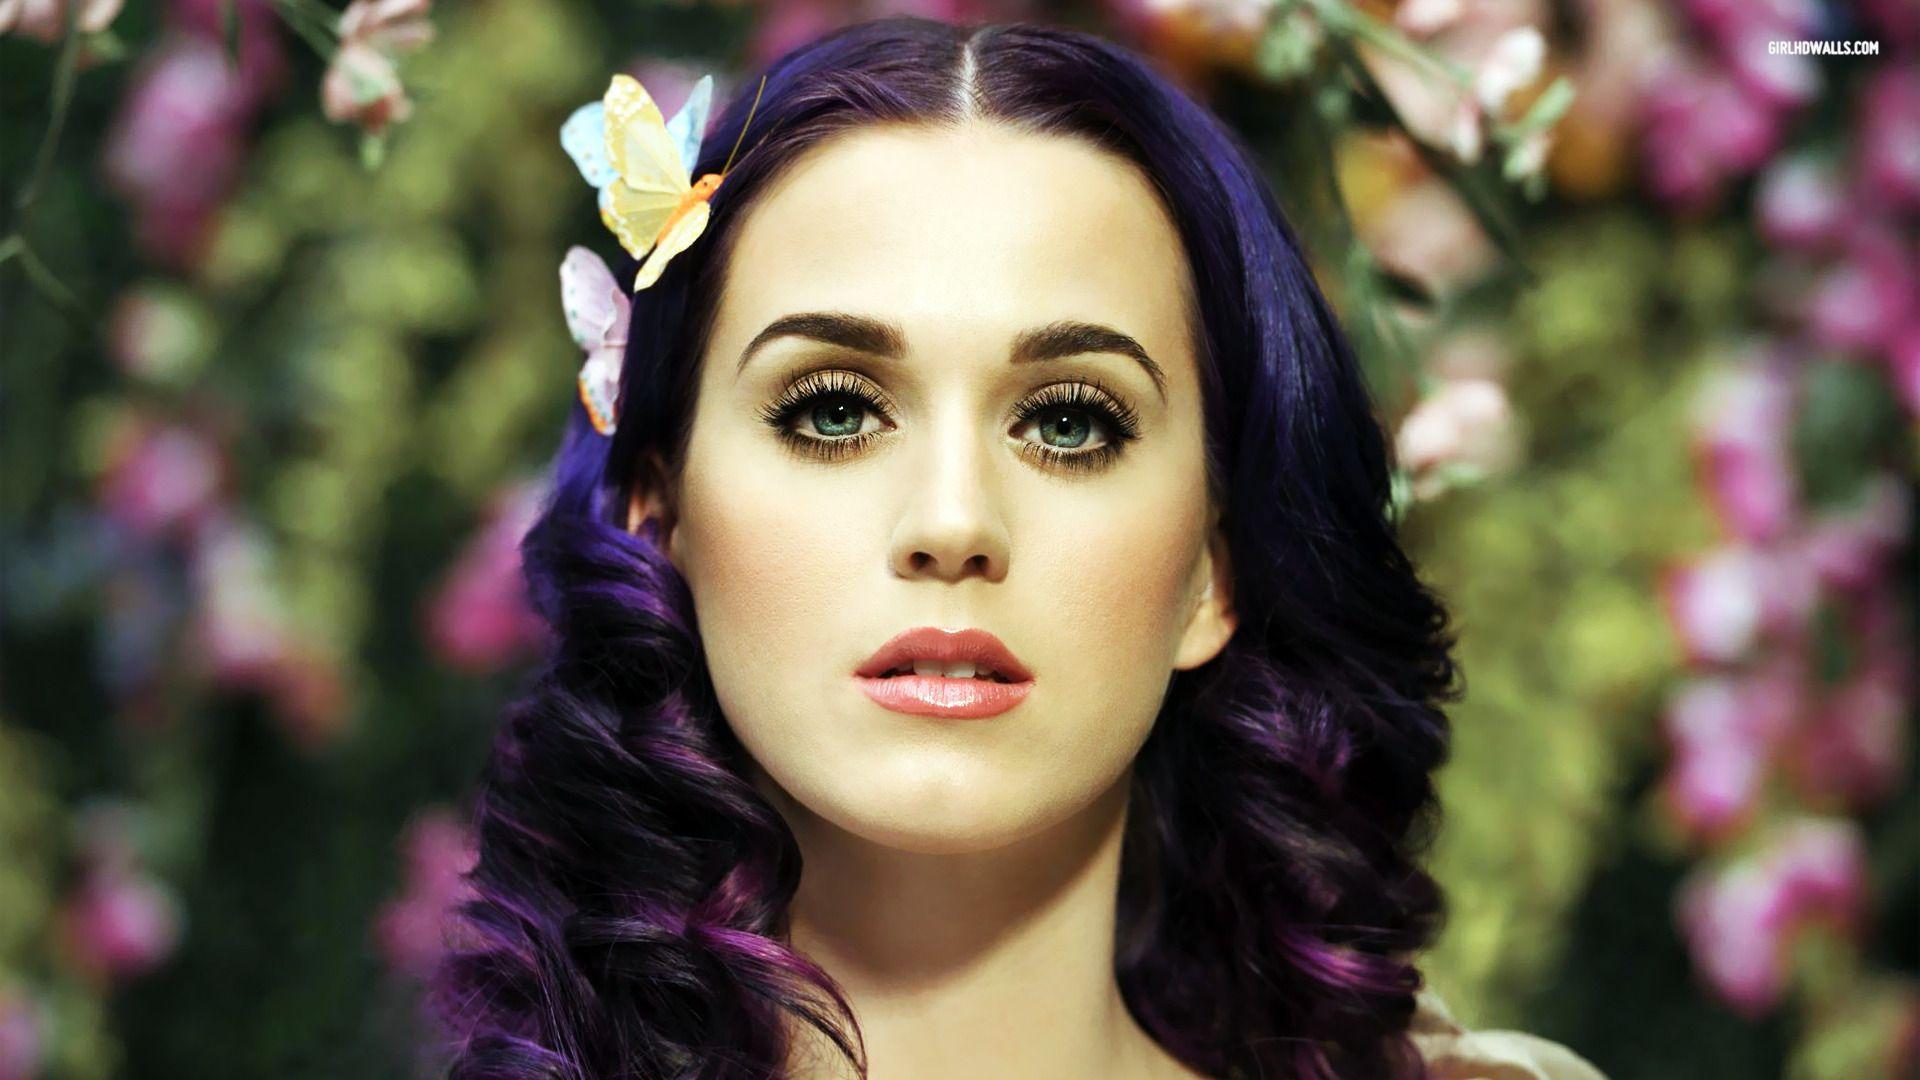 Wallpapers For > Katy Perry Hot Wallpapers 2013